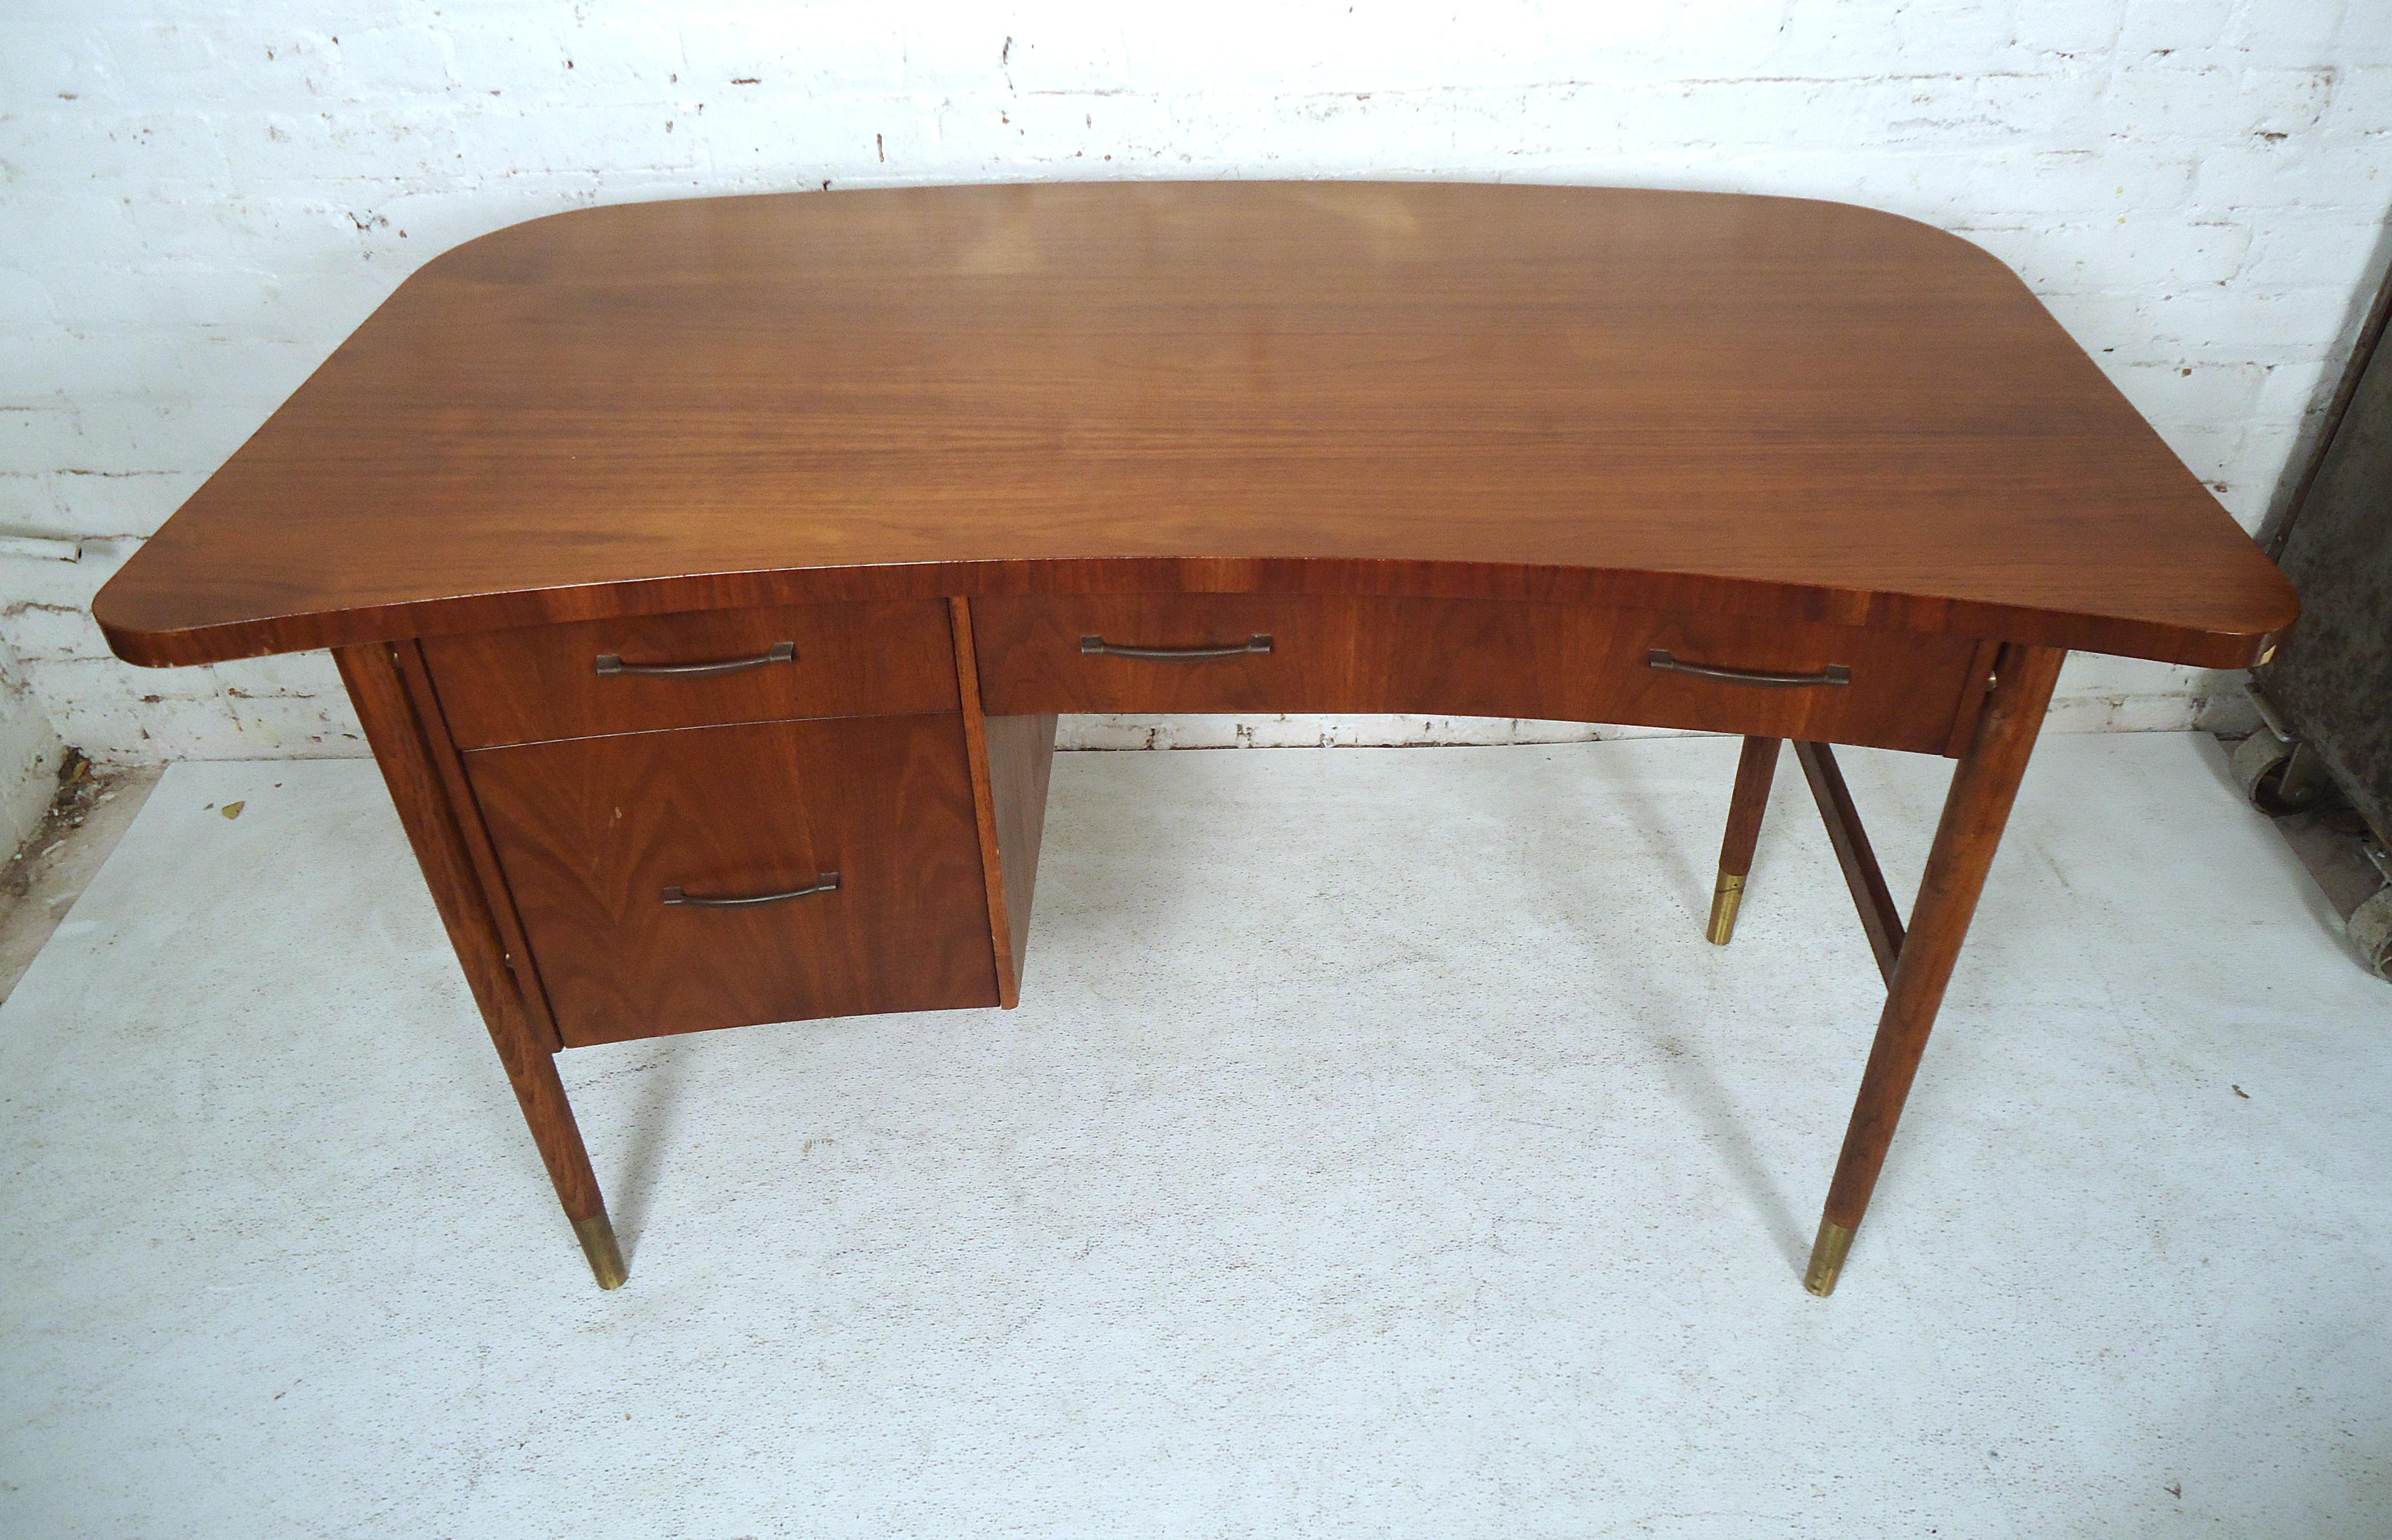 This unusual vintage modern desk features a bowed front, three drawers, brass pulls, round legs, rich walnut grain desk and upholstered chair.
Chair dimensions: 19